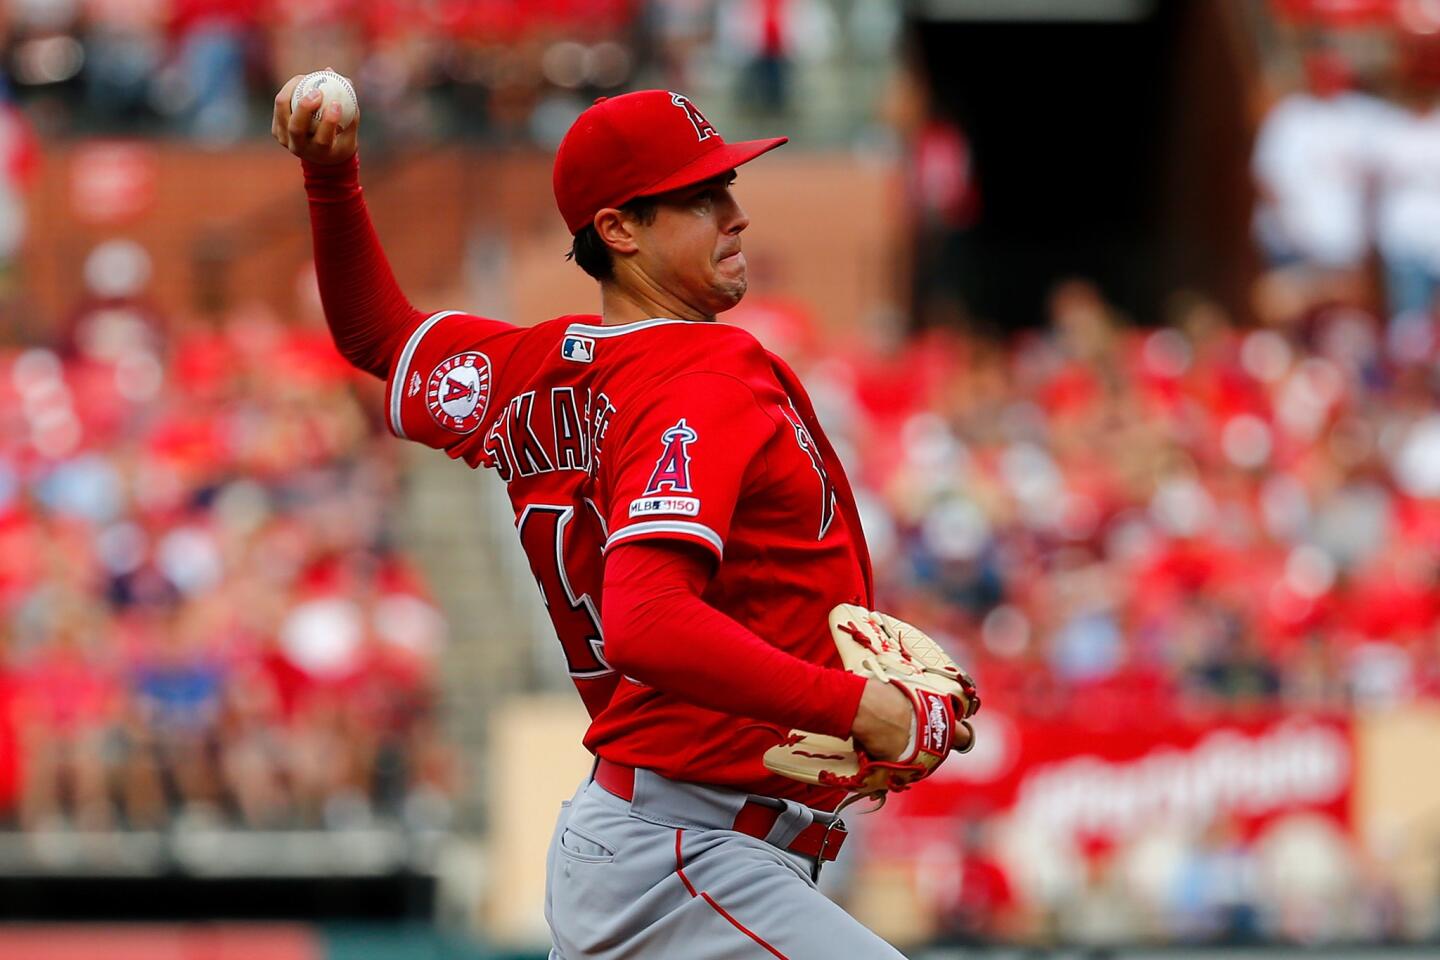 Tyler Skaggs of the Angels delivers a pitch against the St. Louis Cardinals in the first inning at Busch Stadium on June 23, 2019, in St. Louis.